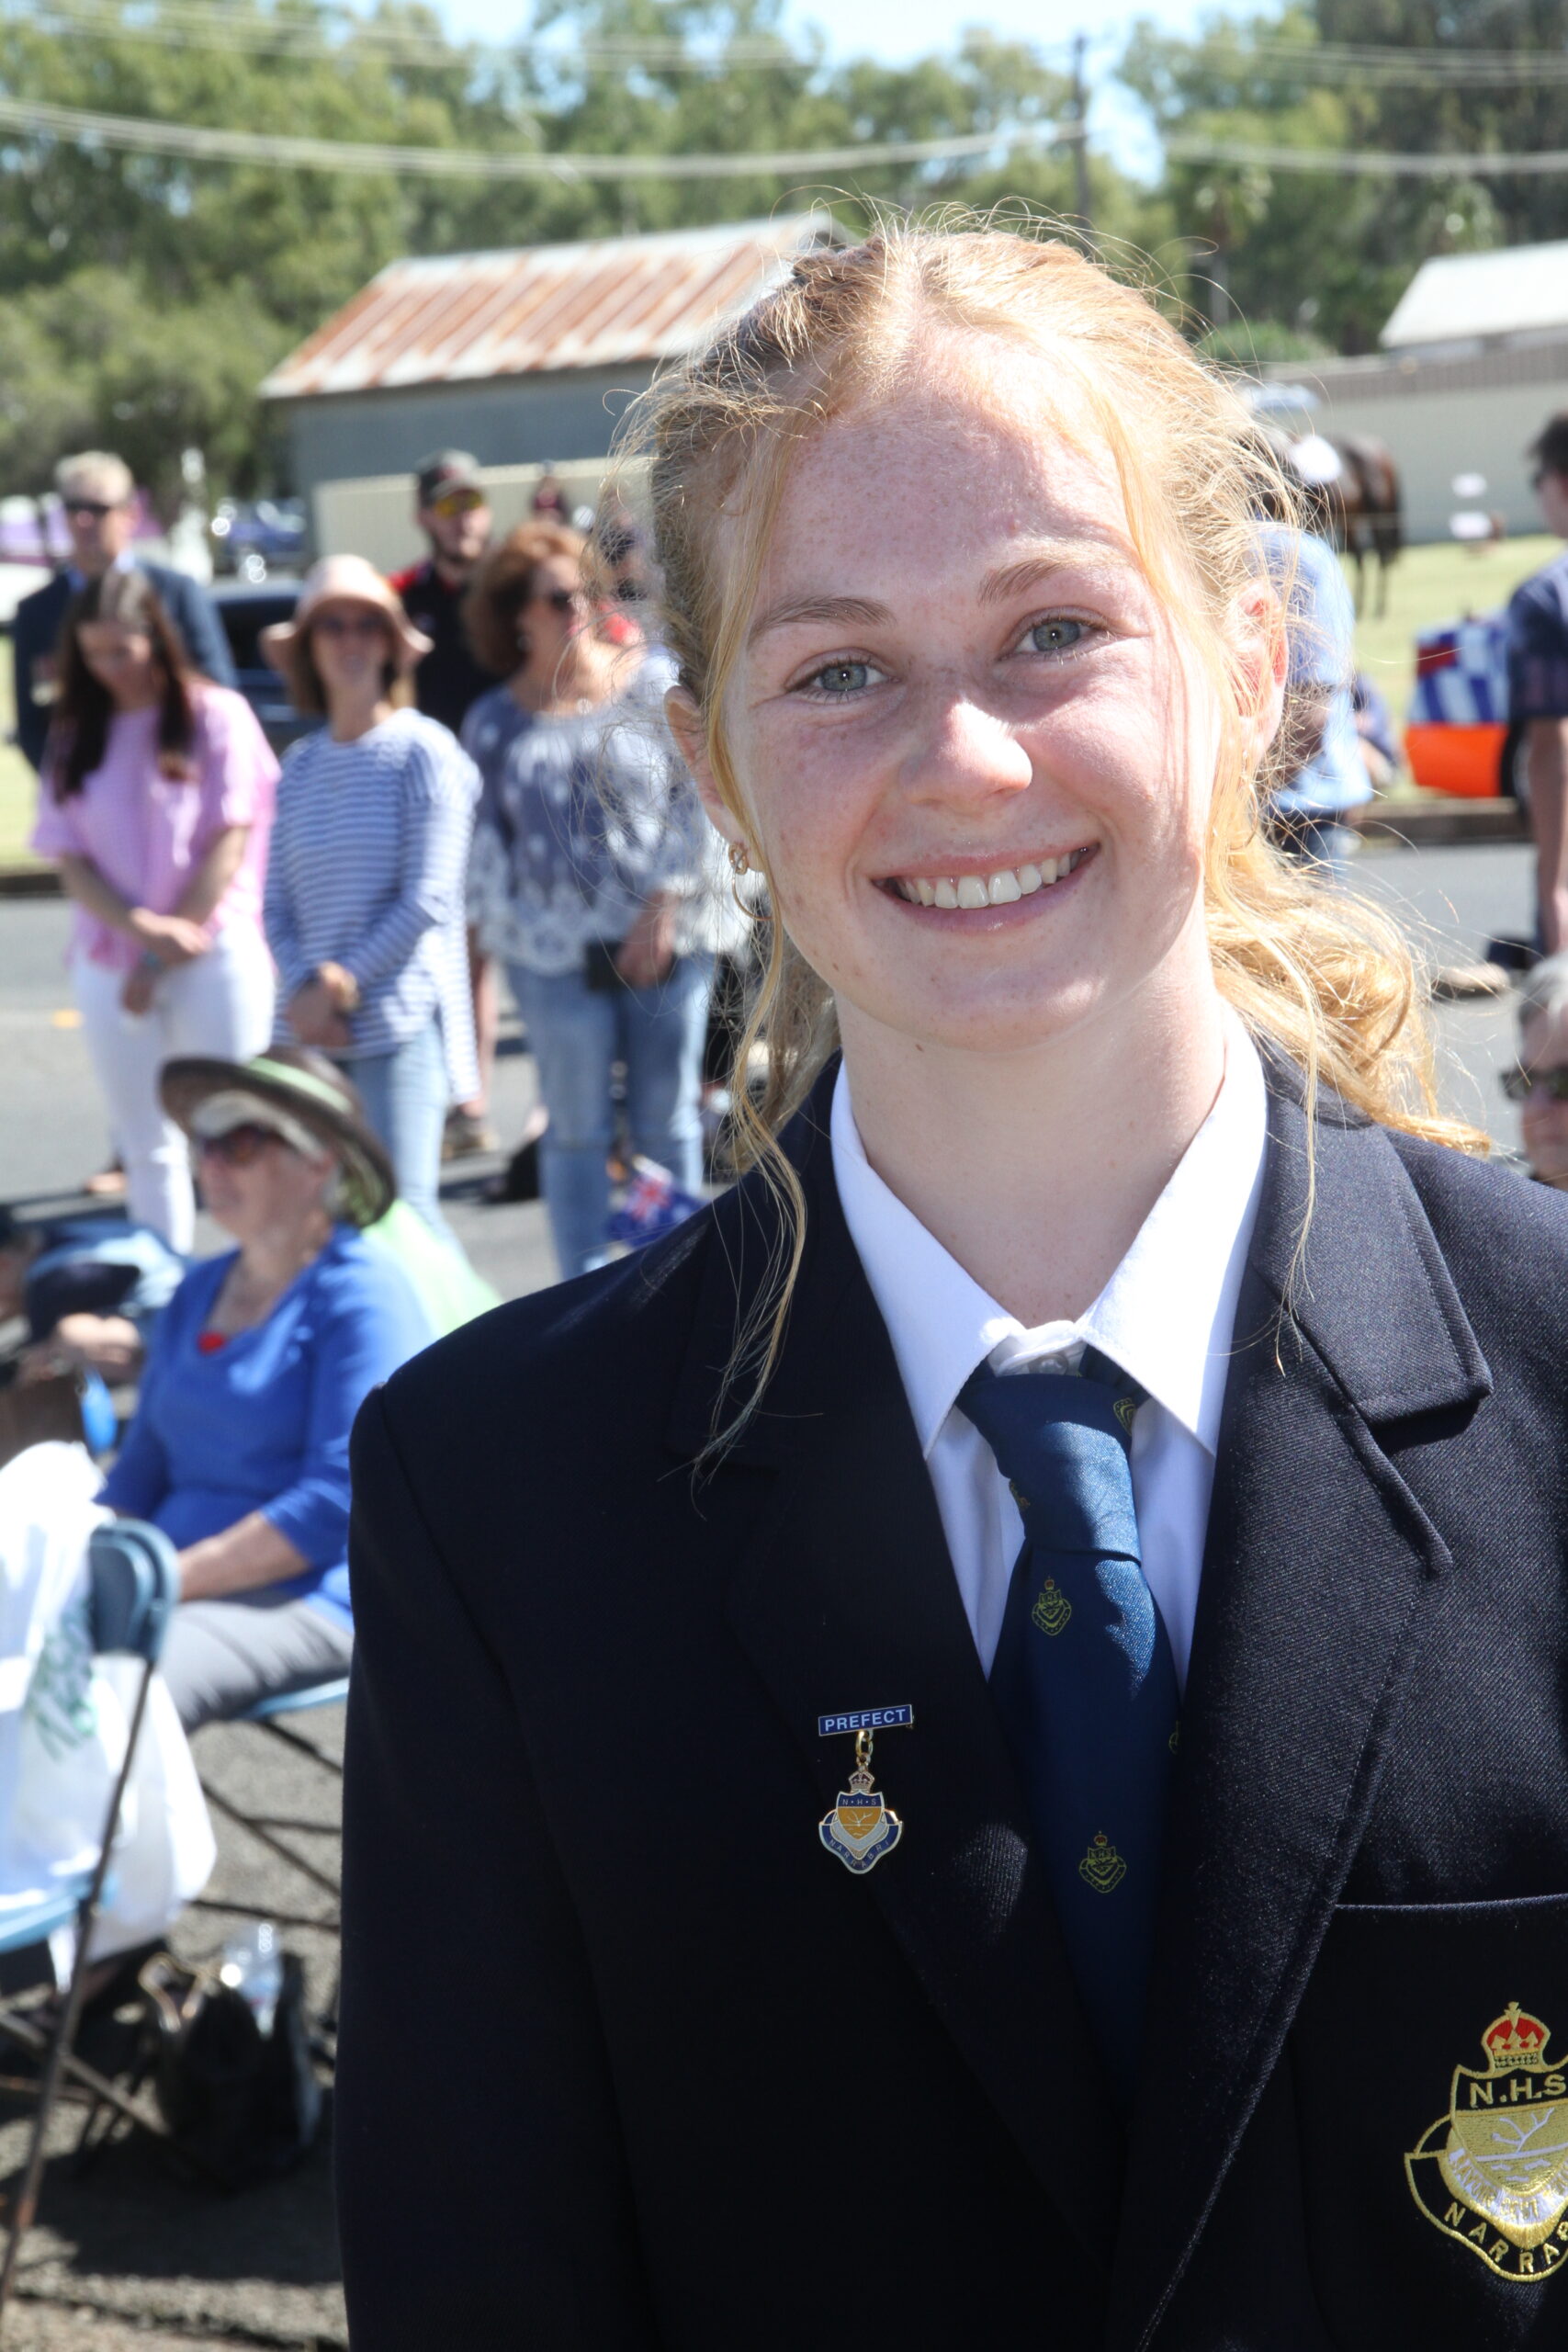 Elsie Ford presented the Australian national anthem at the Anzac Day ceremony in Narrabri.